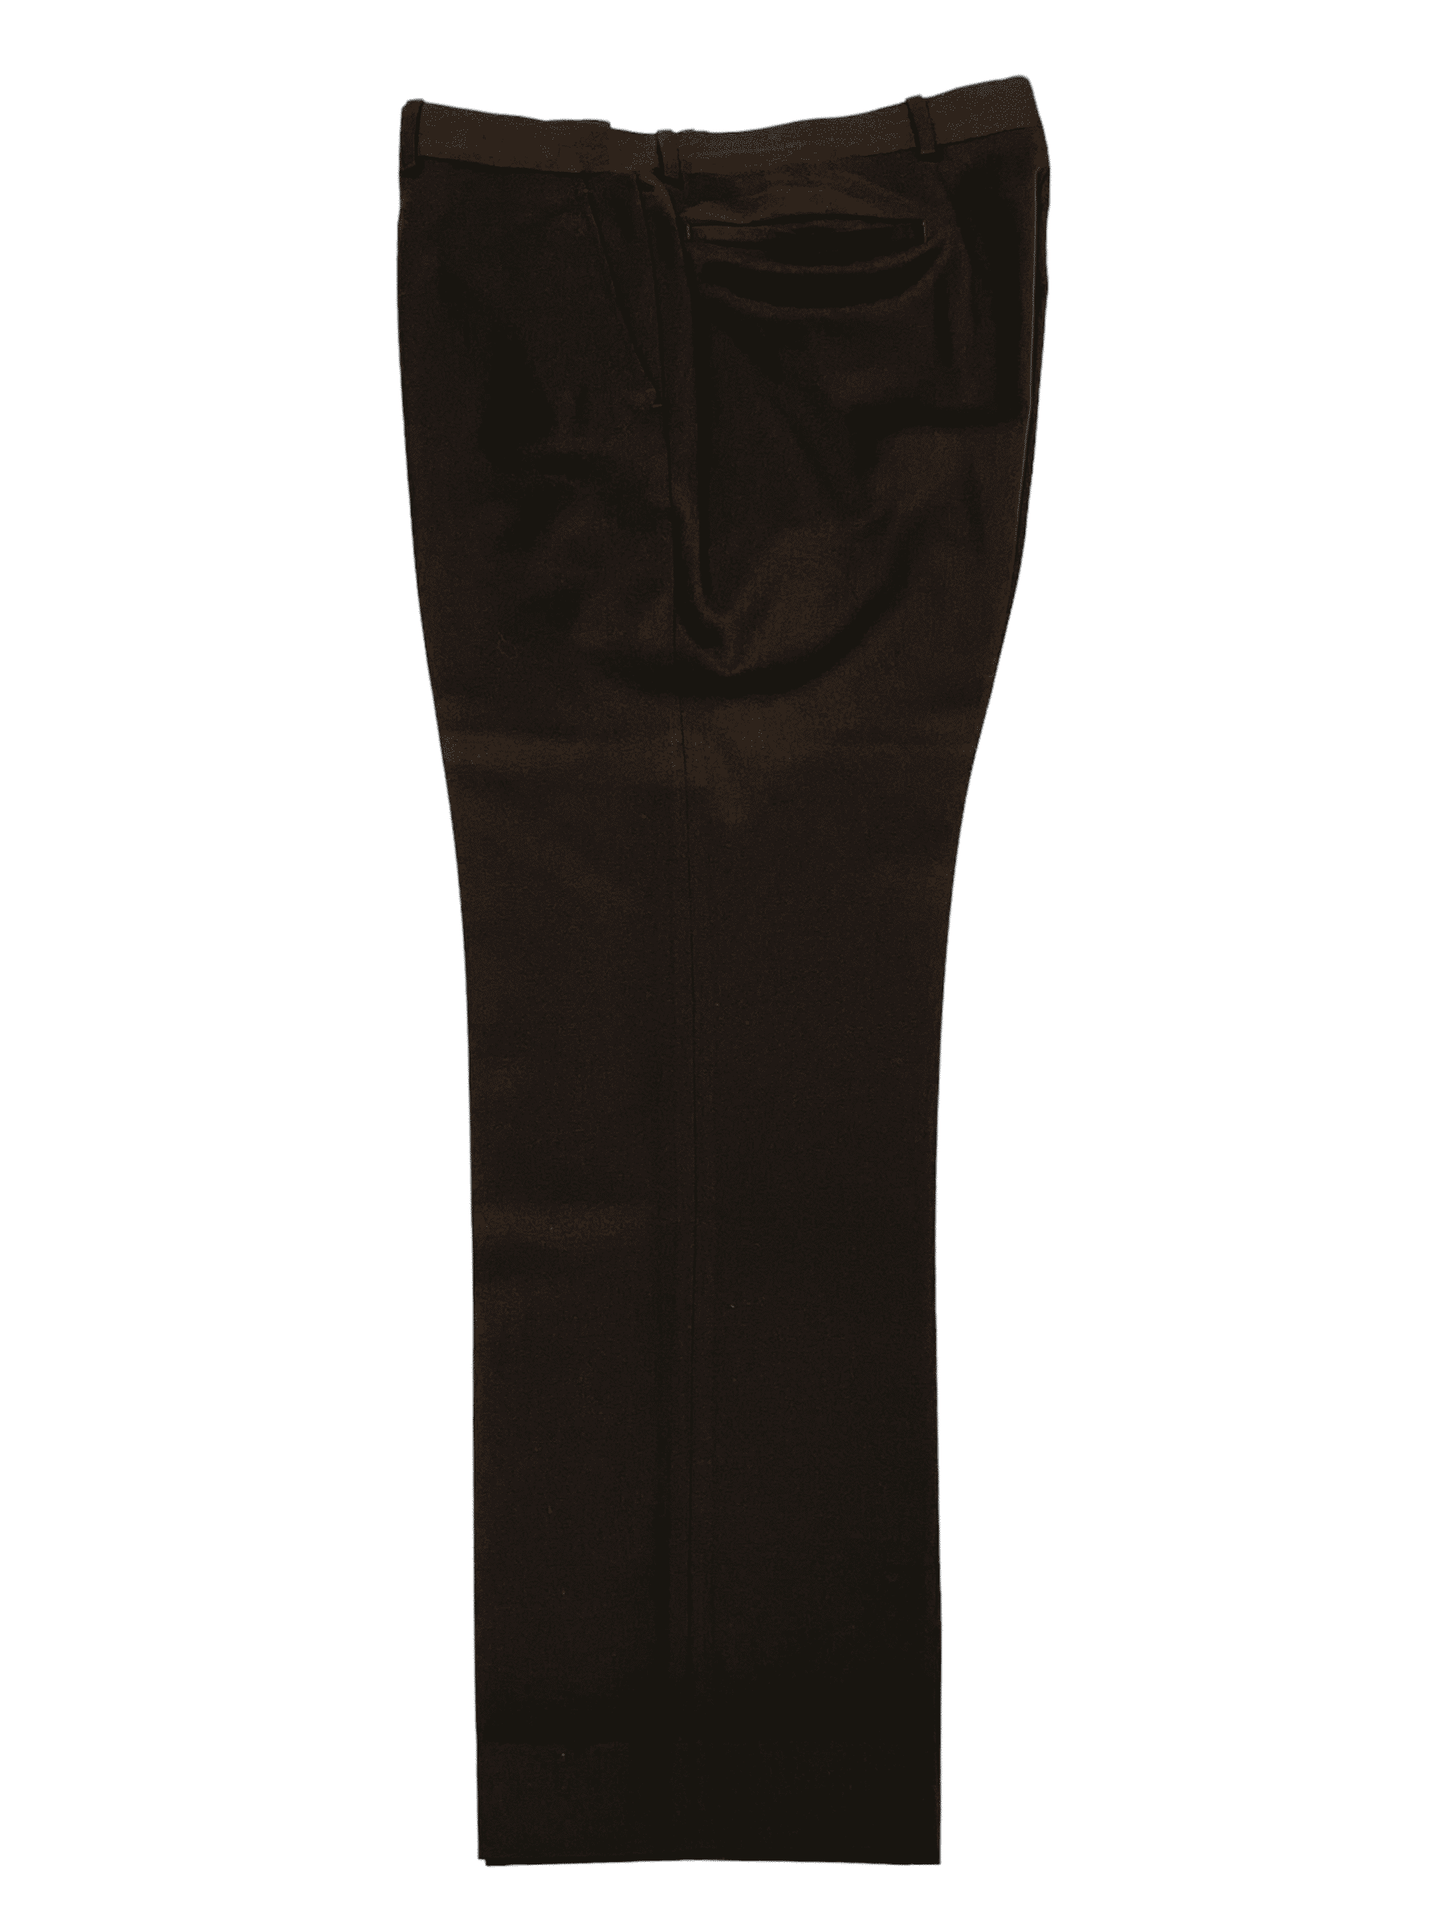 Burberry Mocha Brown Wool Dress Pant 34W 29L - Genuine Design Luxury Consignment Calgary, Alberta, Canada New and Pre-Owned Clothing, Shoes, Accessories.